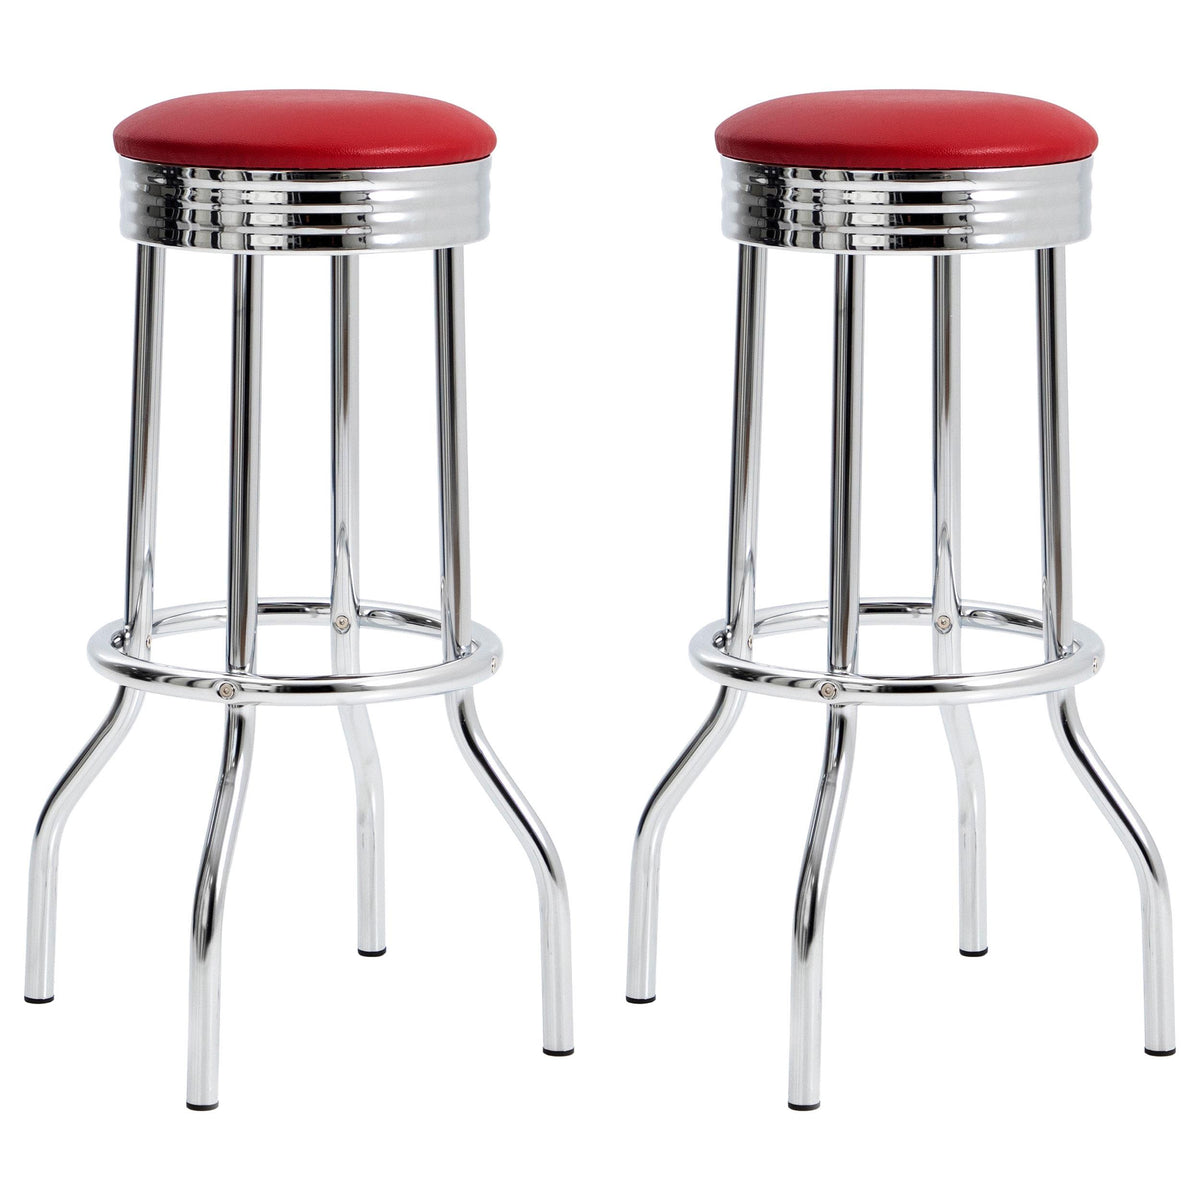 Theodore Upholstered Top Bar Stools Red and Chrome (Set of 2)  Las Vegas Furniture Stores